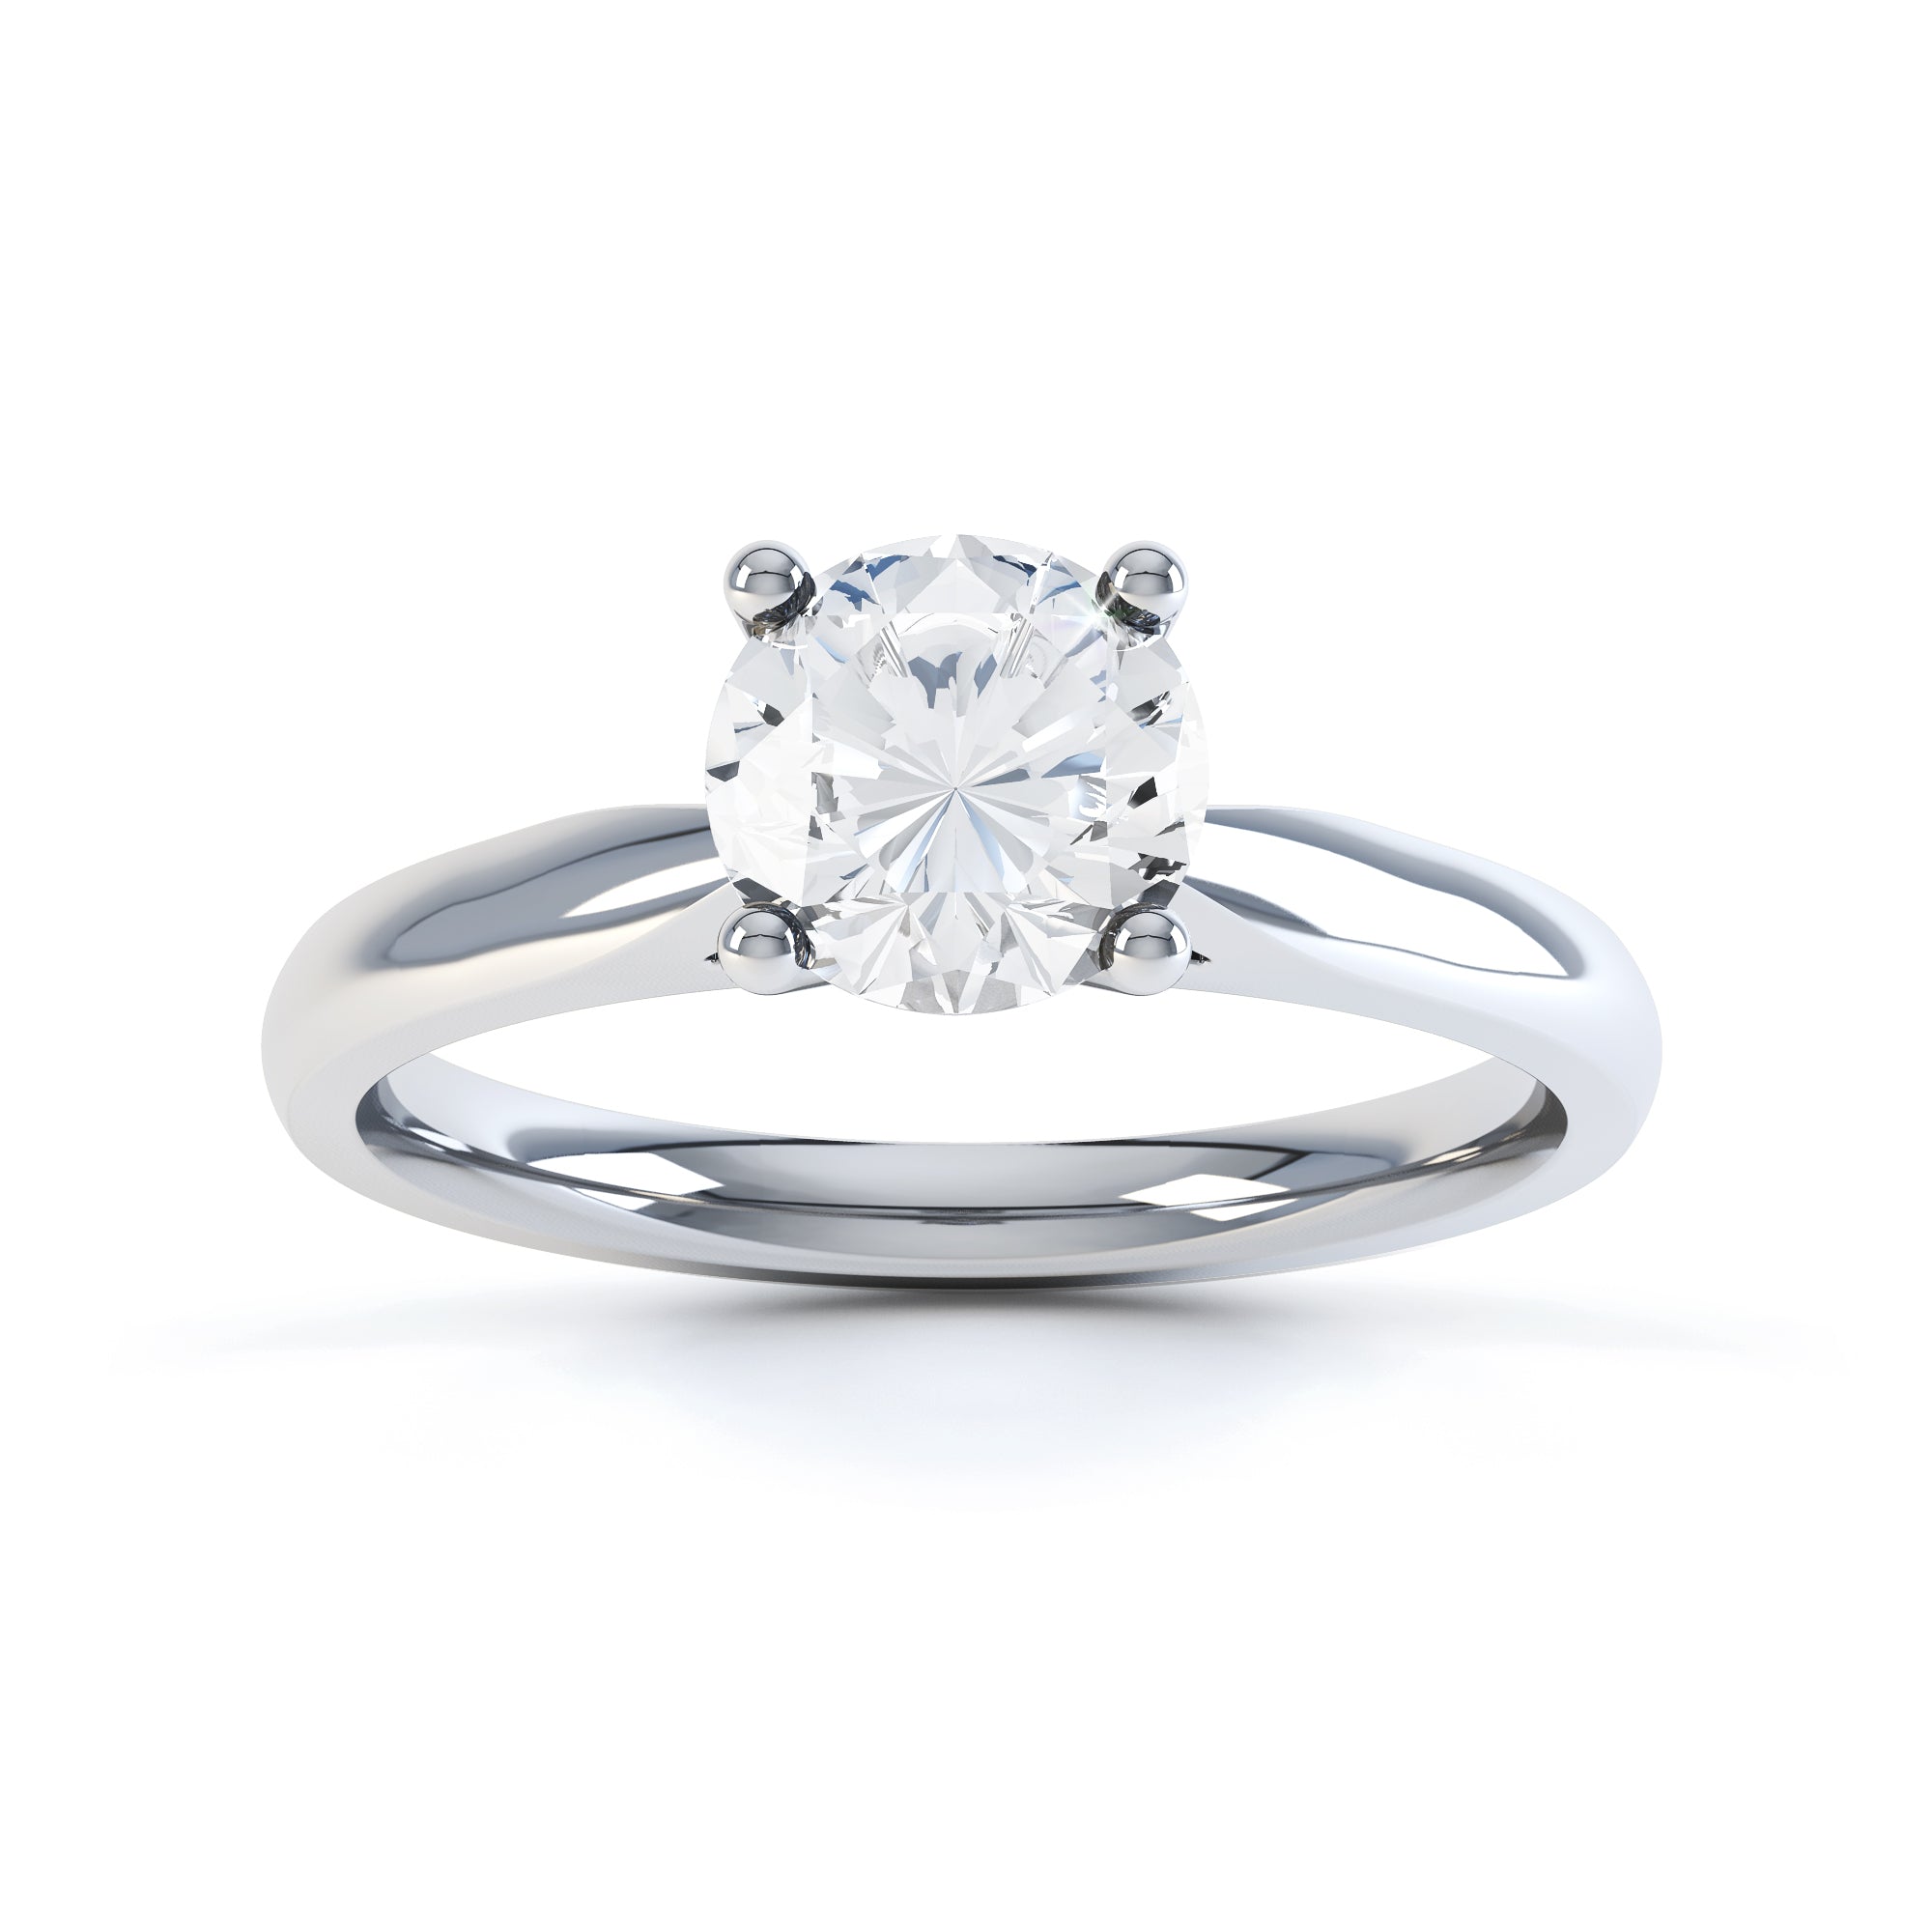 Round Brilliant Cut Centre Stone, 4 claw, Tapered Shoulders, Diamond Engagement Ring